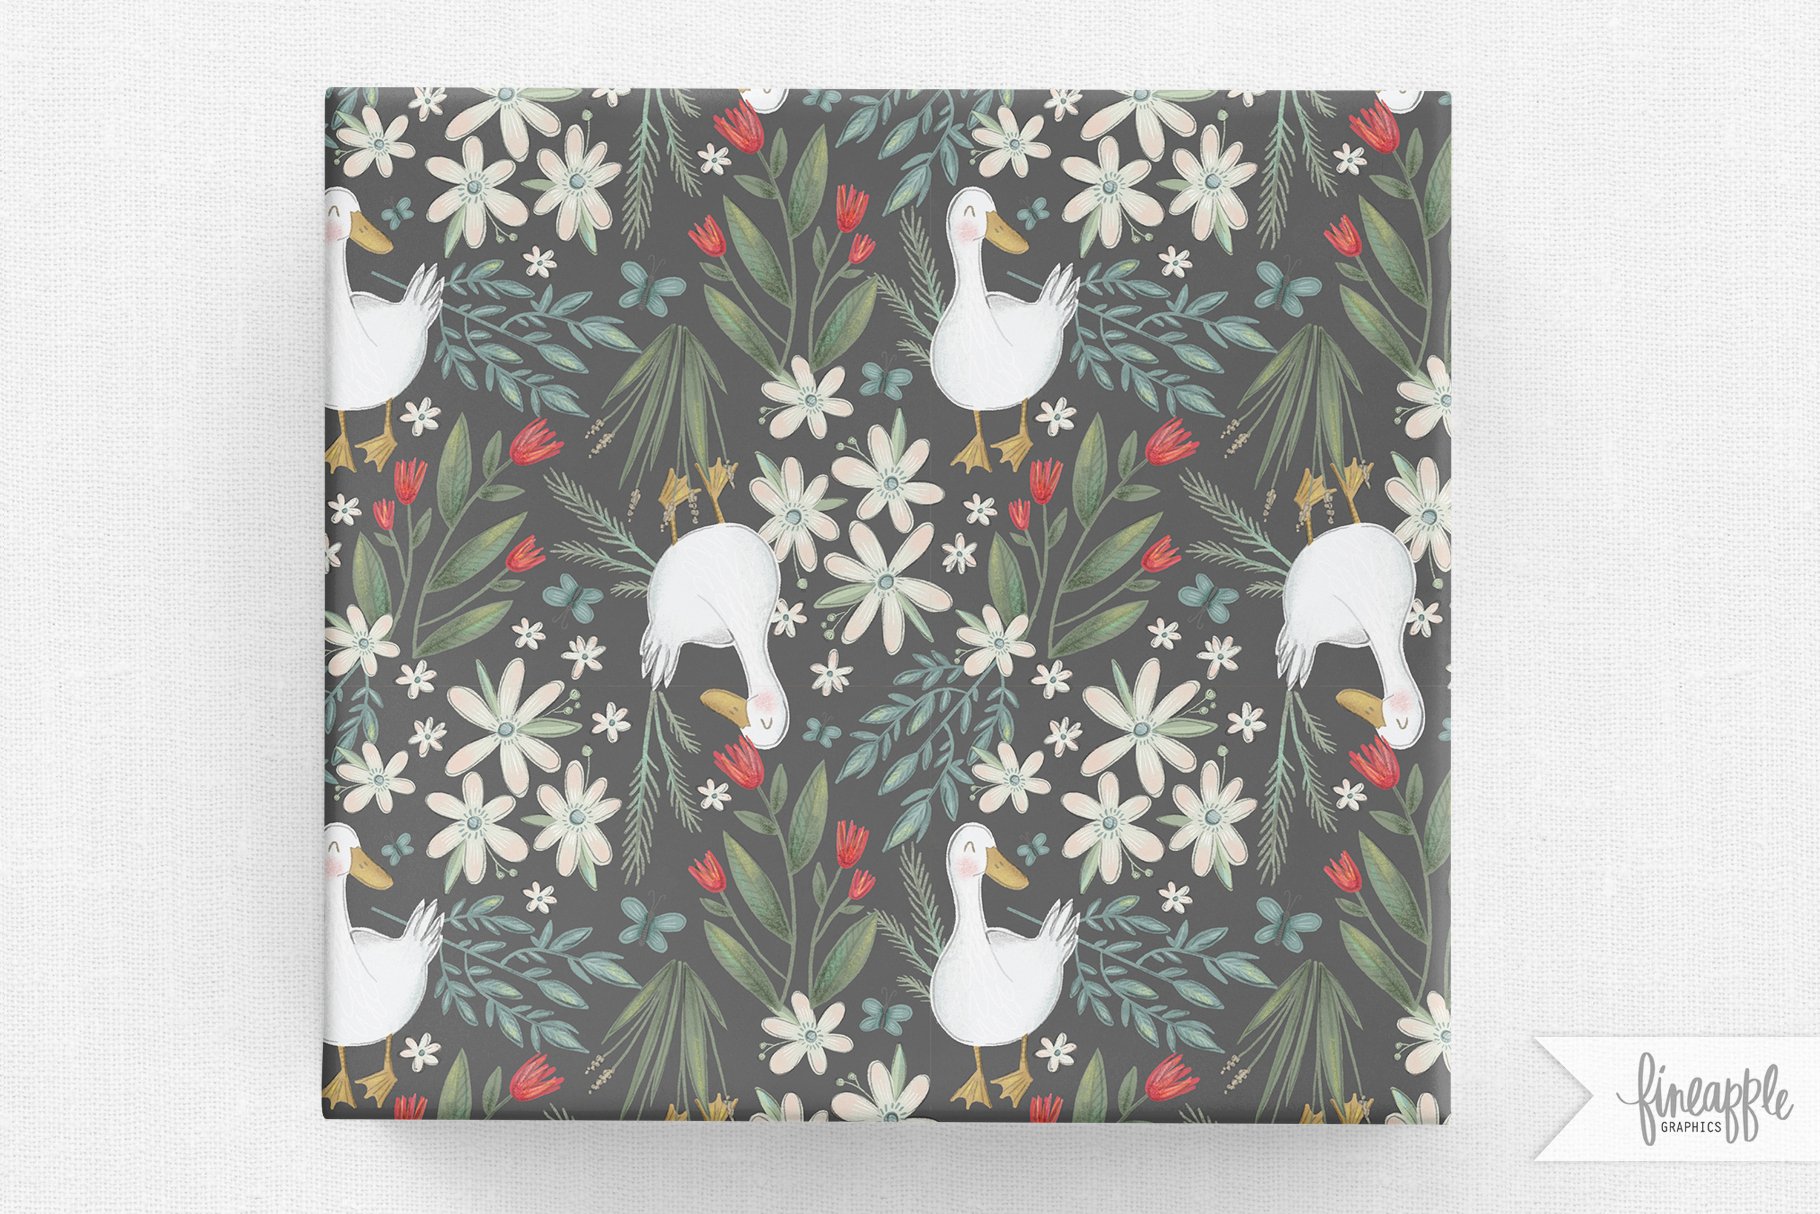 Olive pattern with the white animals.